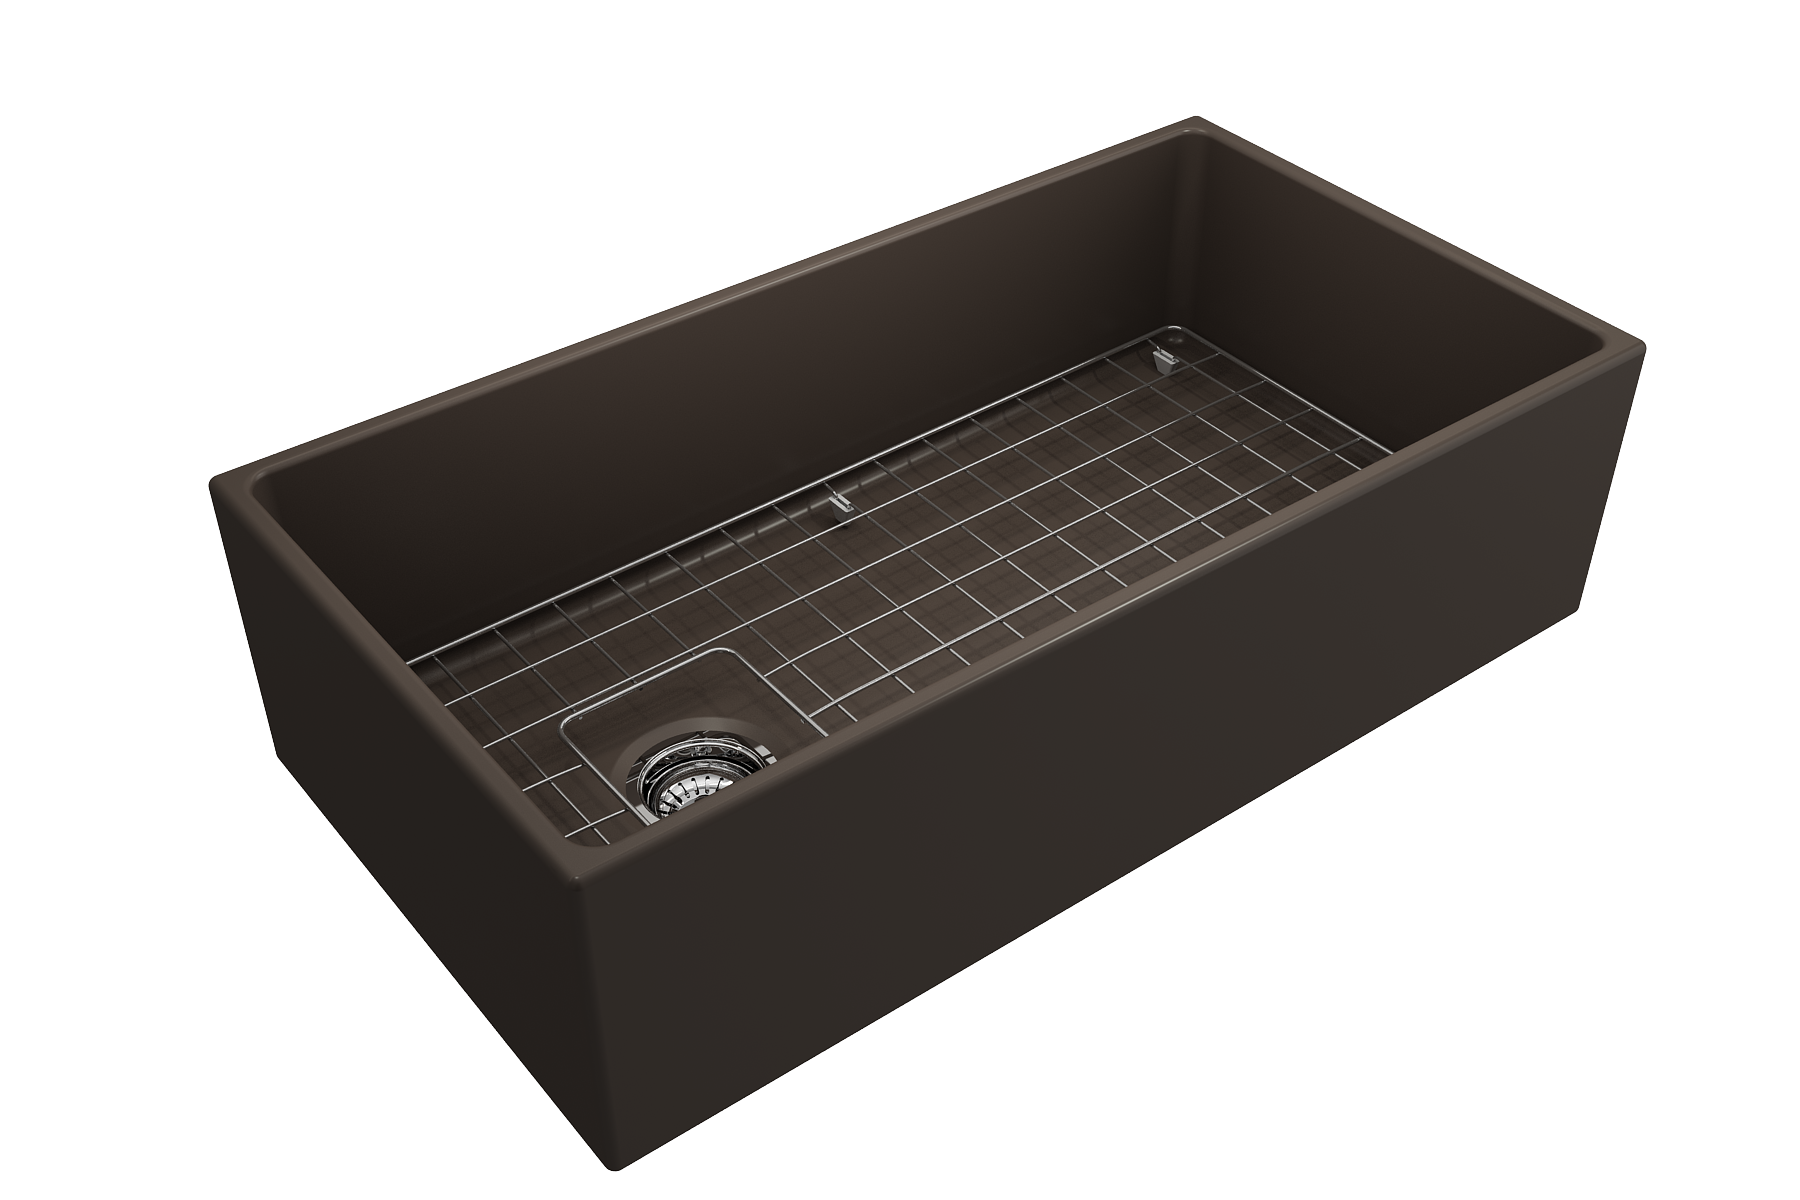 Bocchi Contempo Apron Front Fireclay 36" Single Bowl Kitchen Sink with Protective Bottom Grid and Strainer, Available in 9 colors!